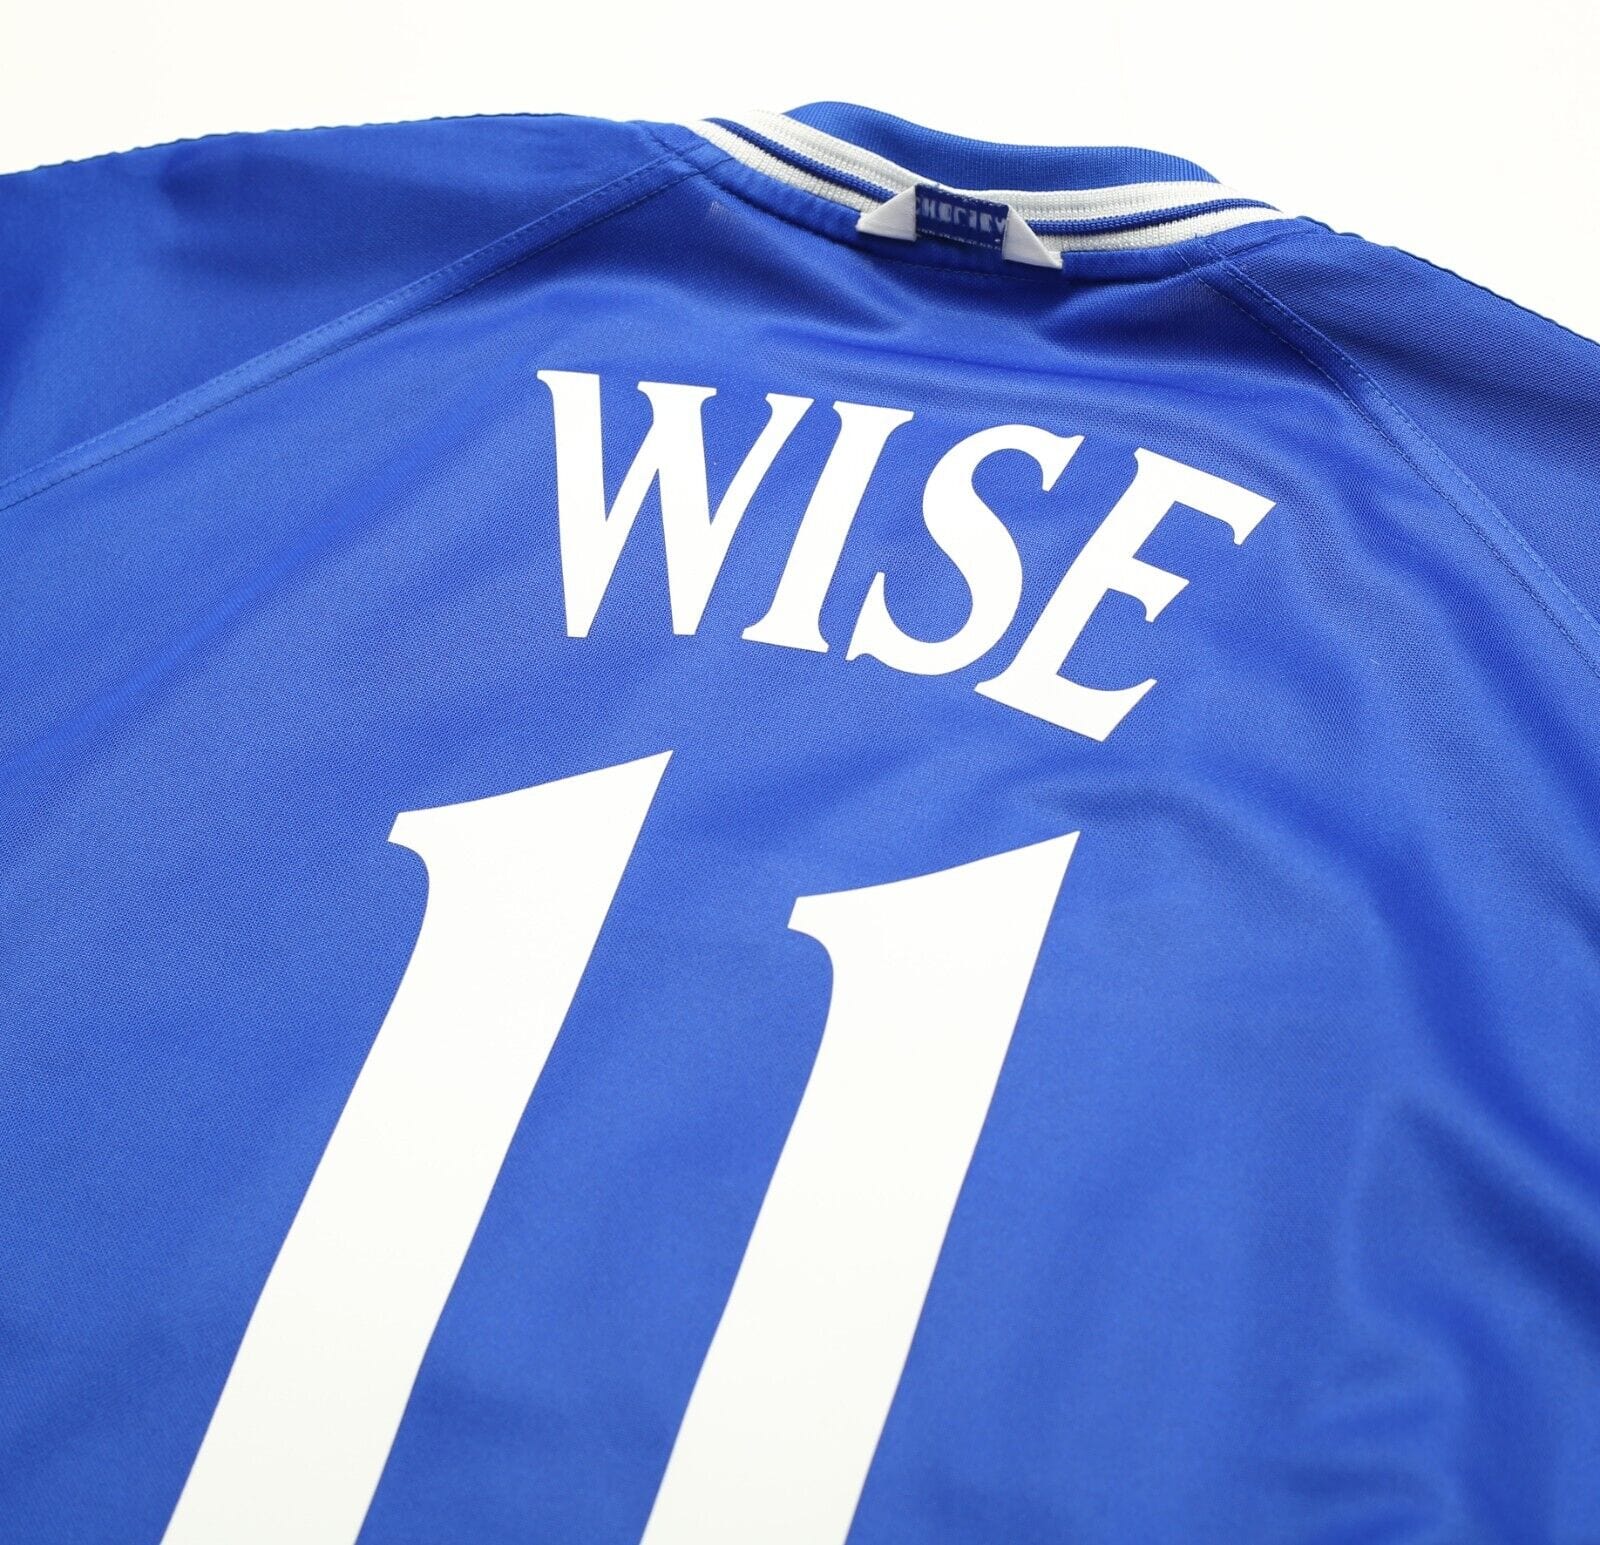 1999/01 WISE #11 Chelsea Vintage Umbro FA CUP FINAL 2000 Football Shirt (XL)